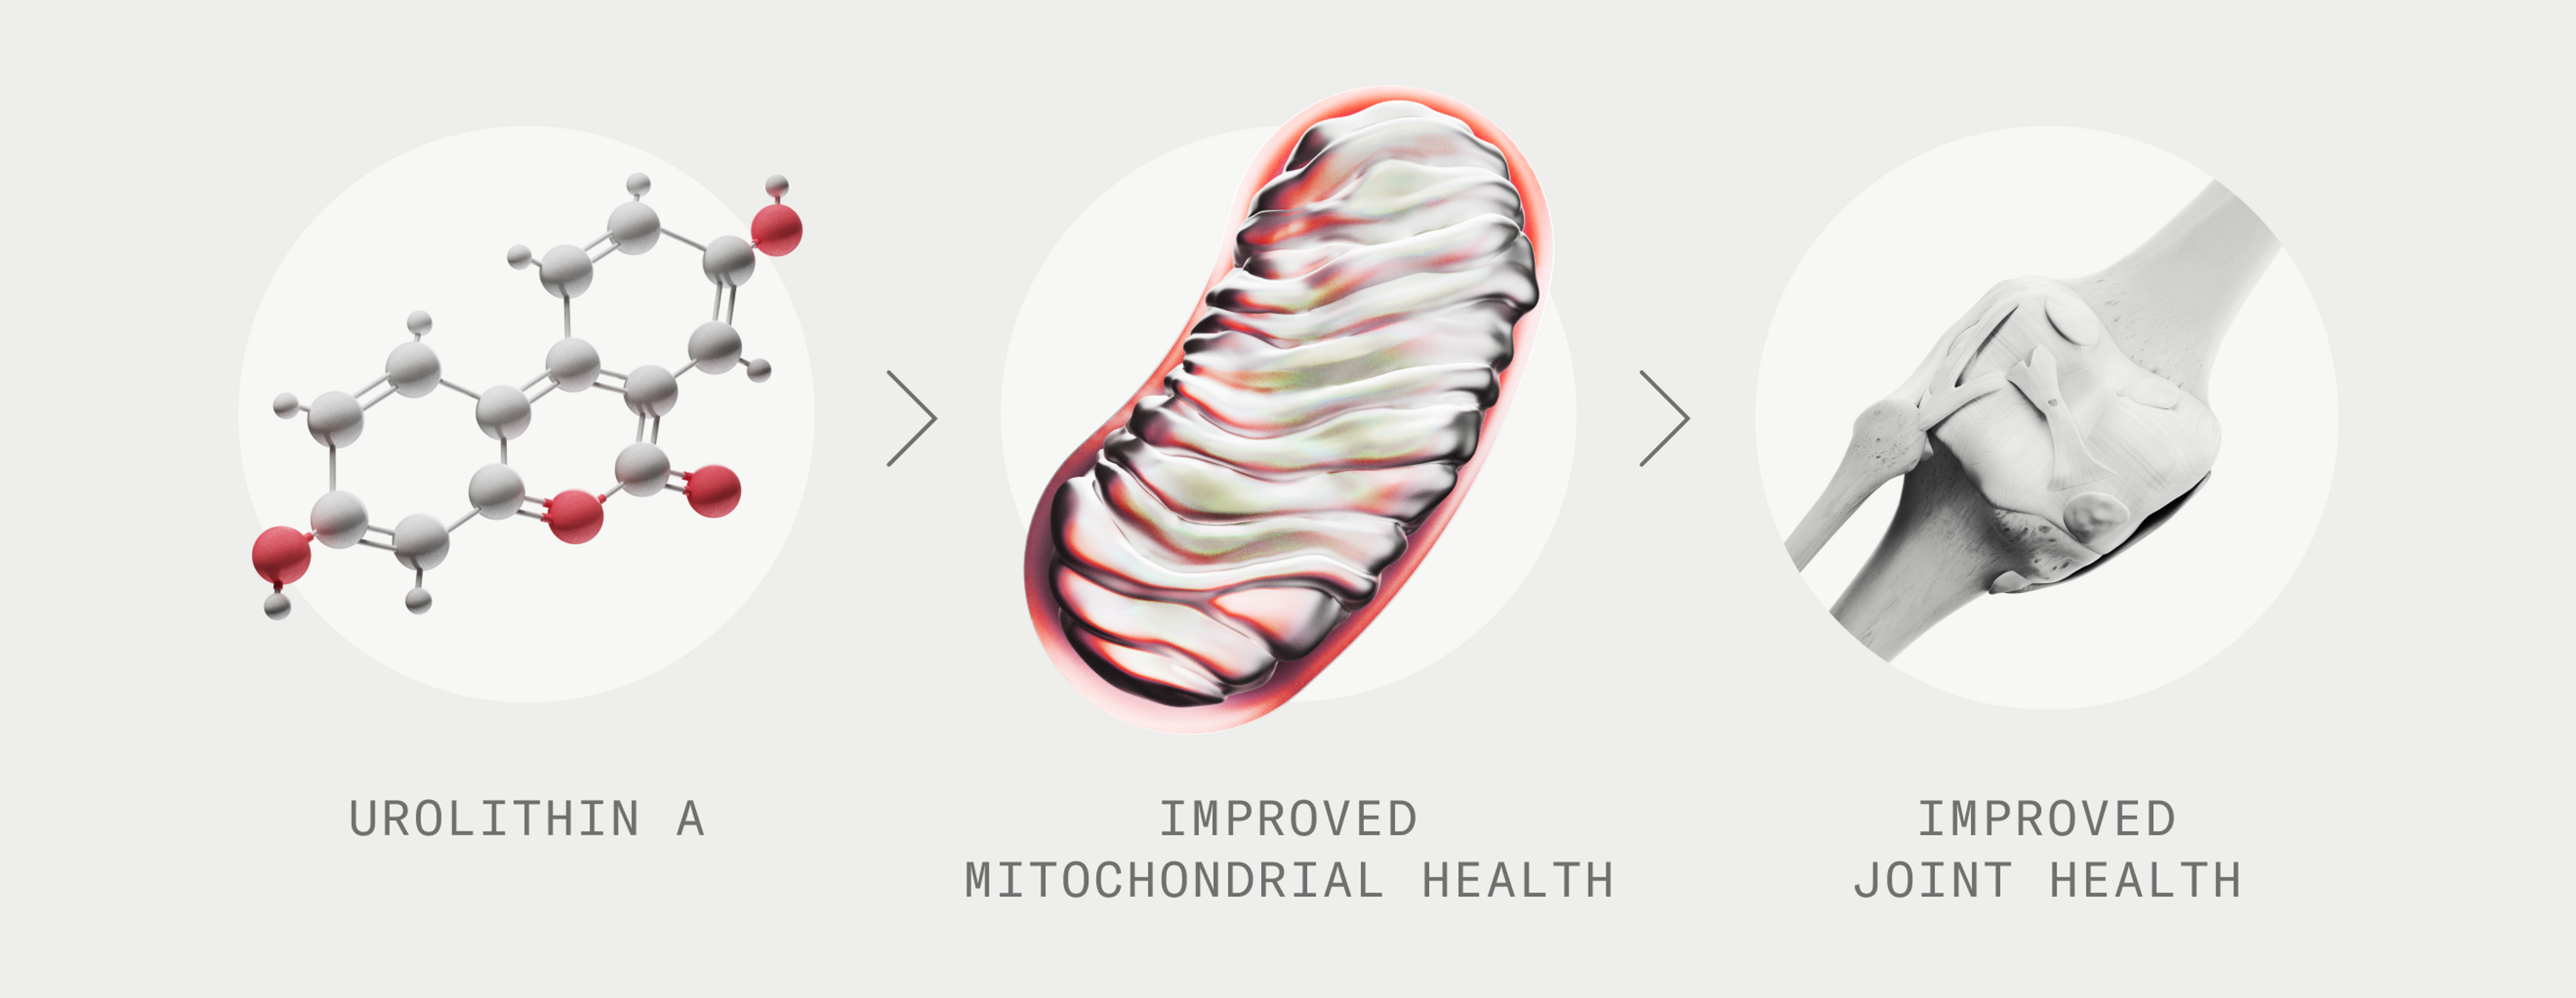 Urolithin A > Improved Mitochondrial Health > Improved Joint Health